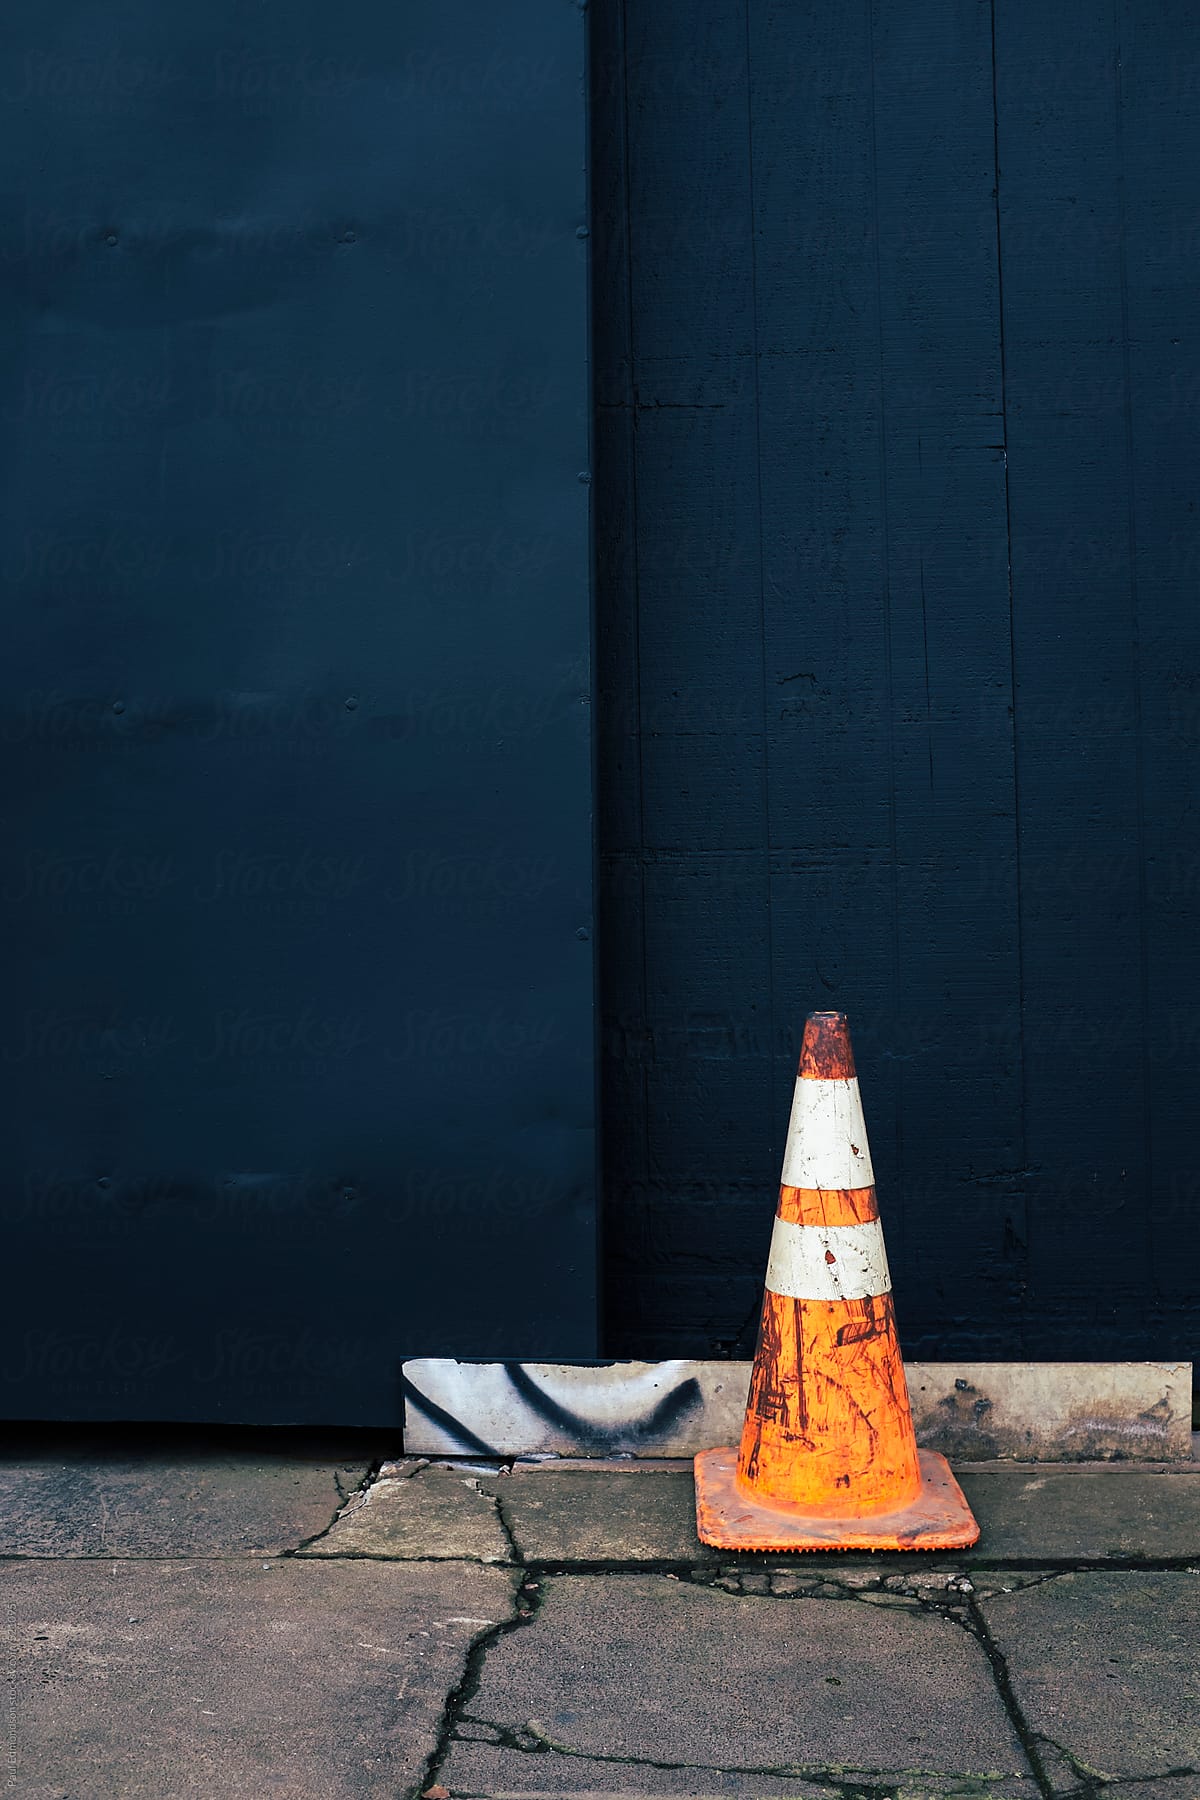 Traffic cone on cracked urban sidewalk, painted wall in background